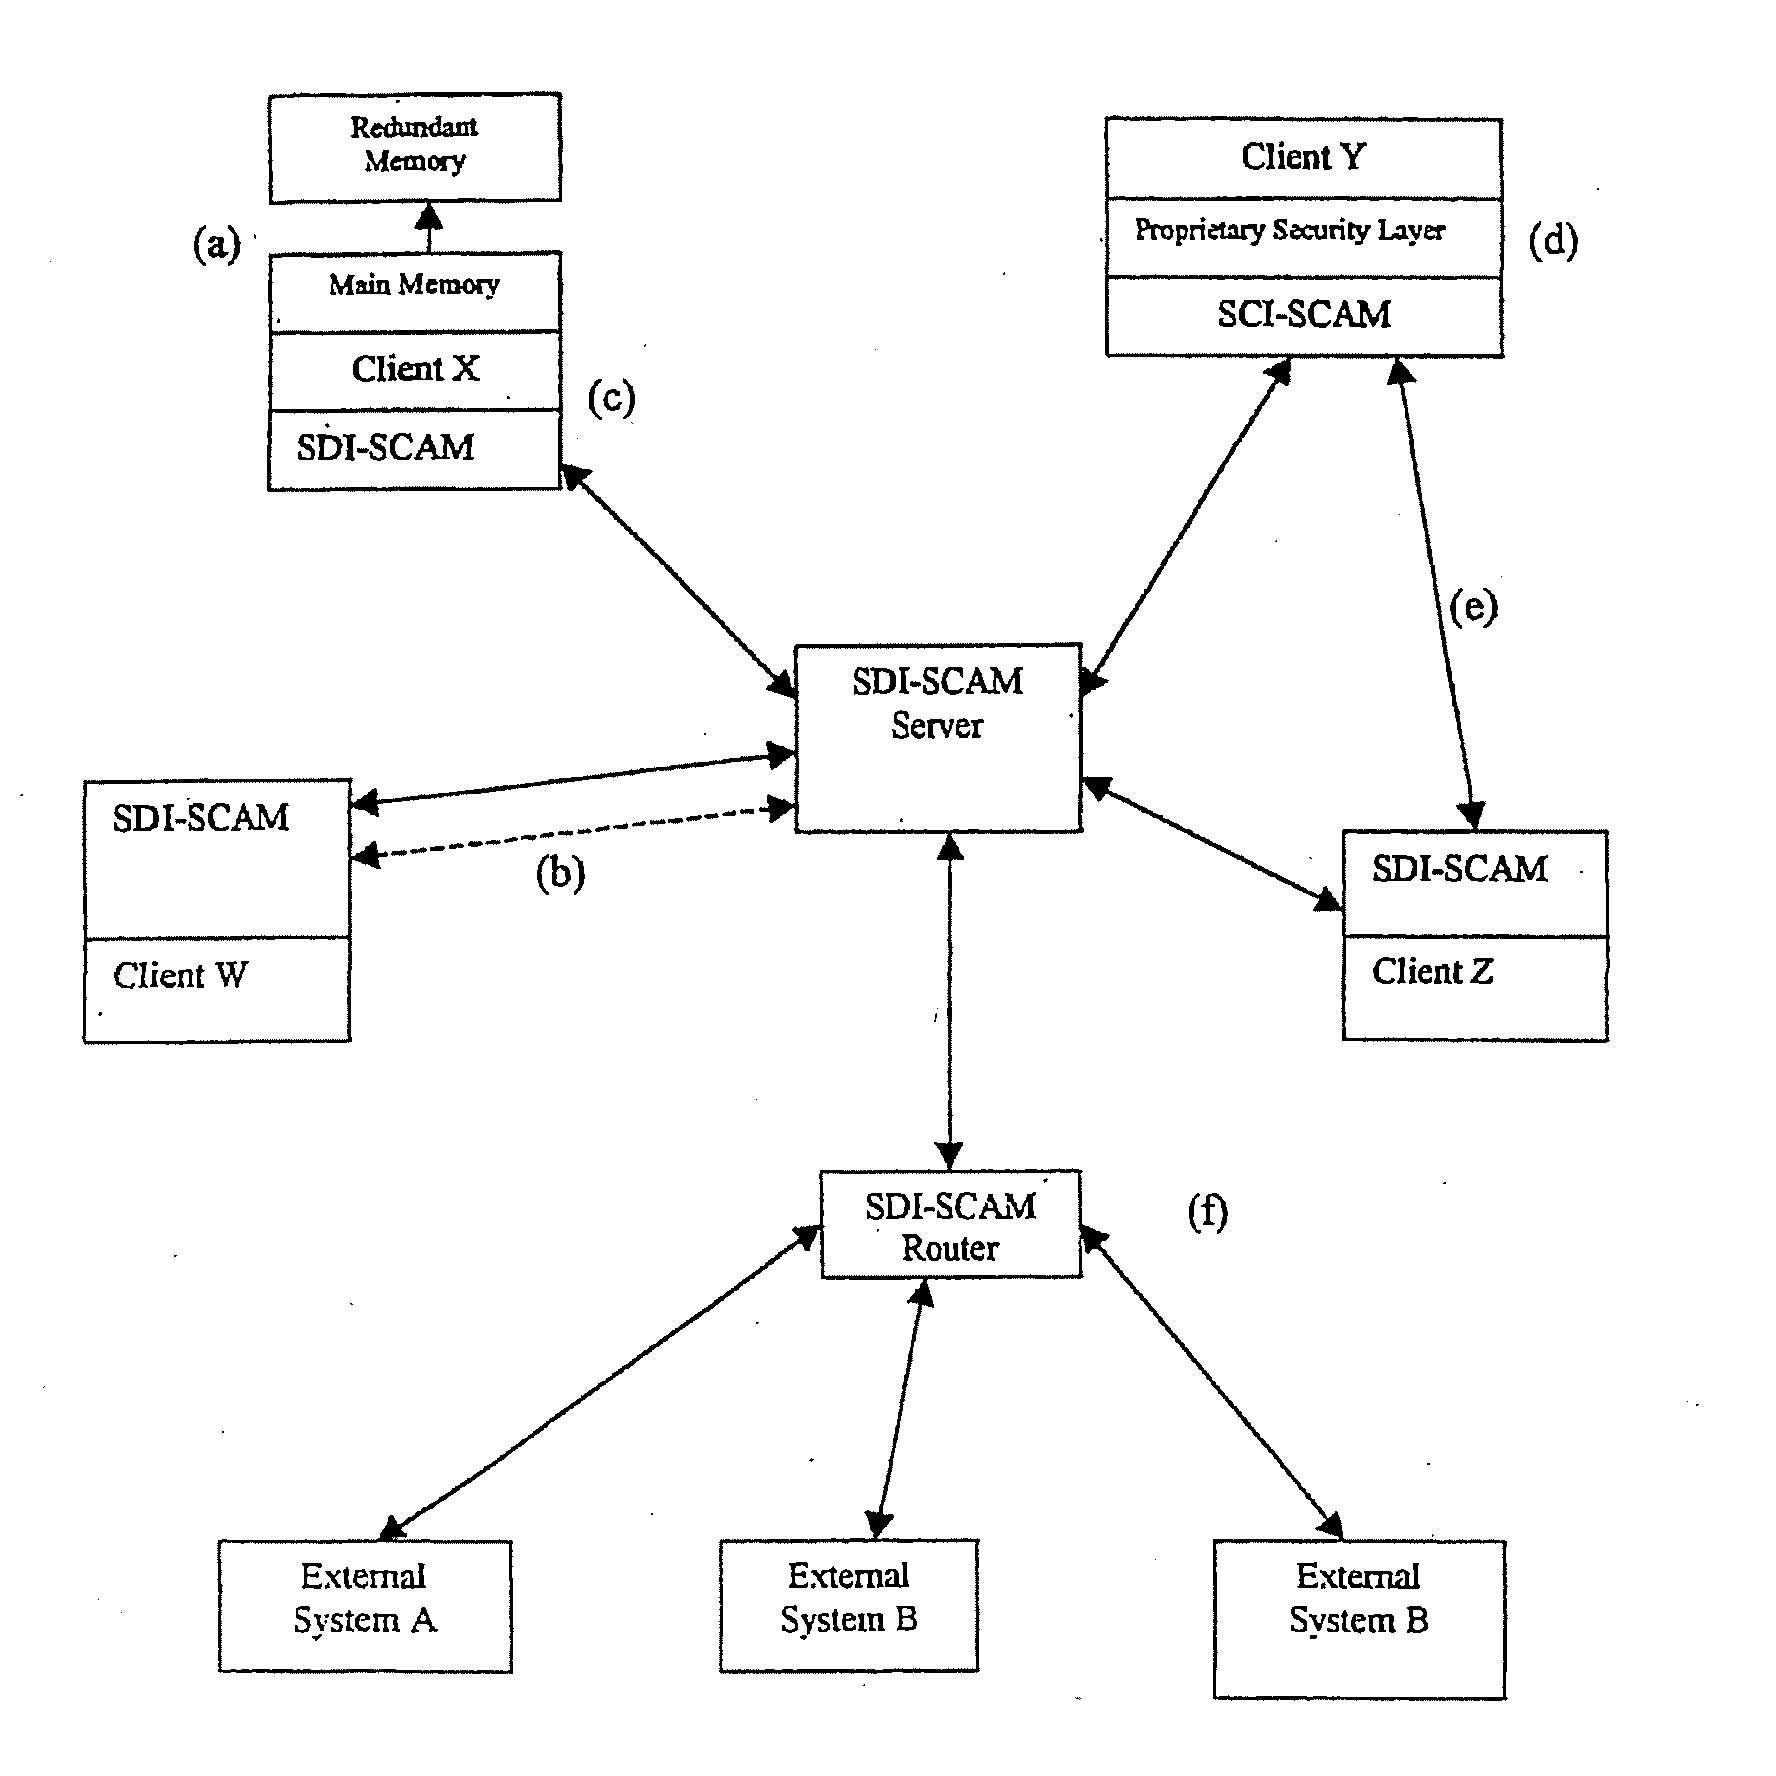 System and method for a distributed application of a network security system (SDI-SCAM)